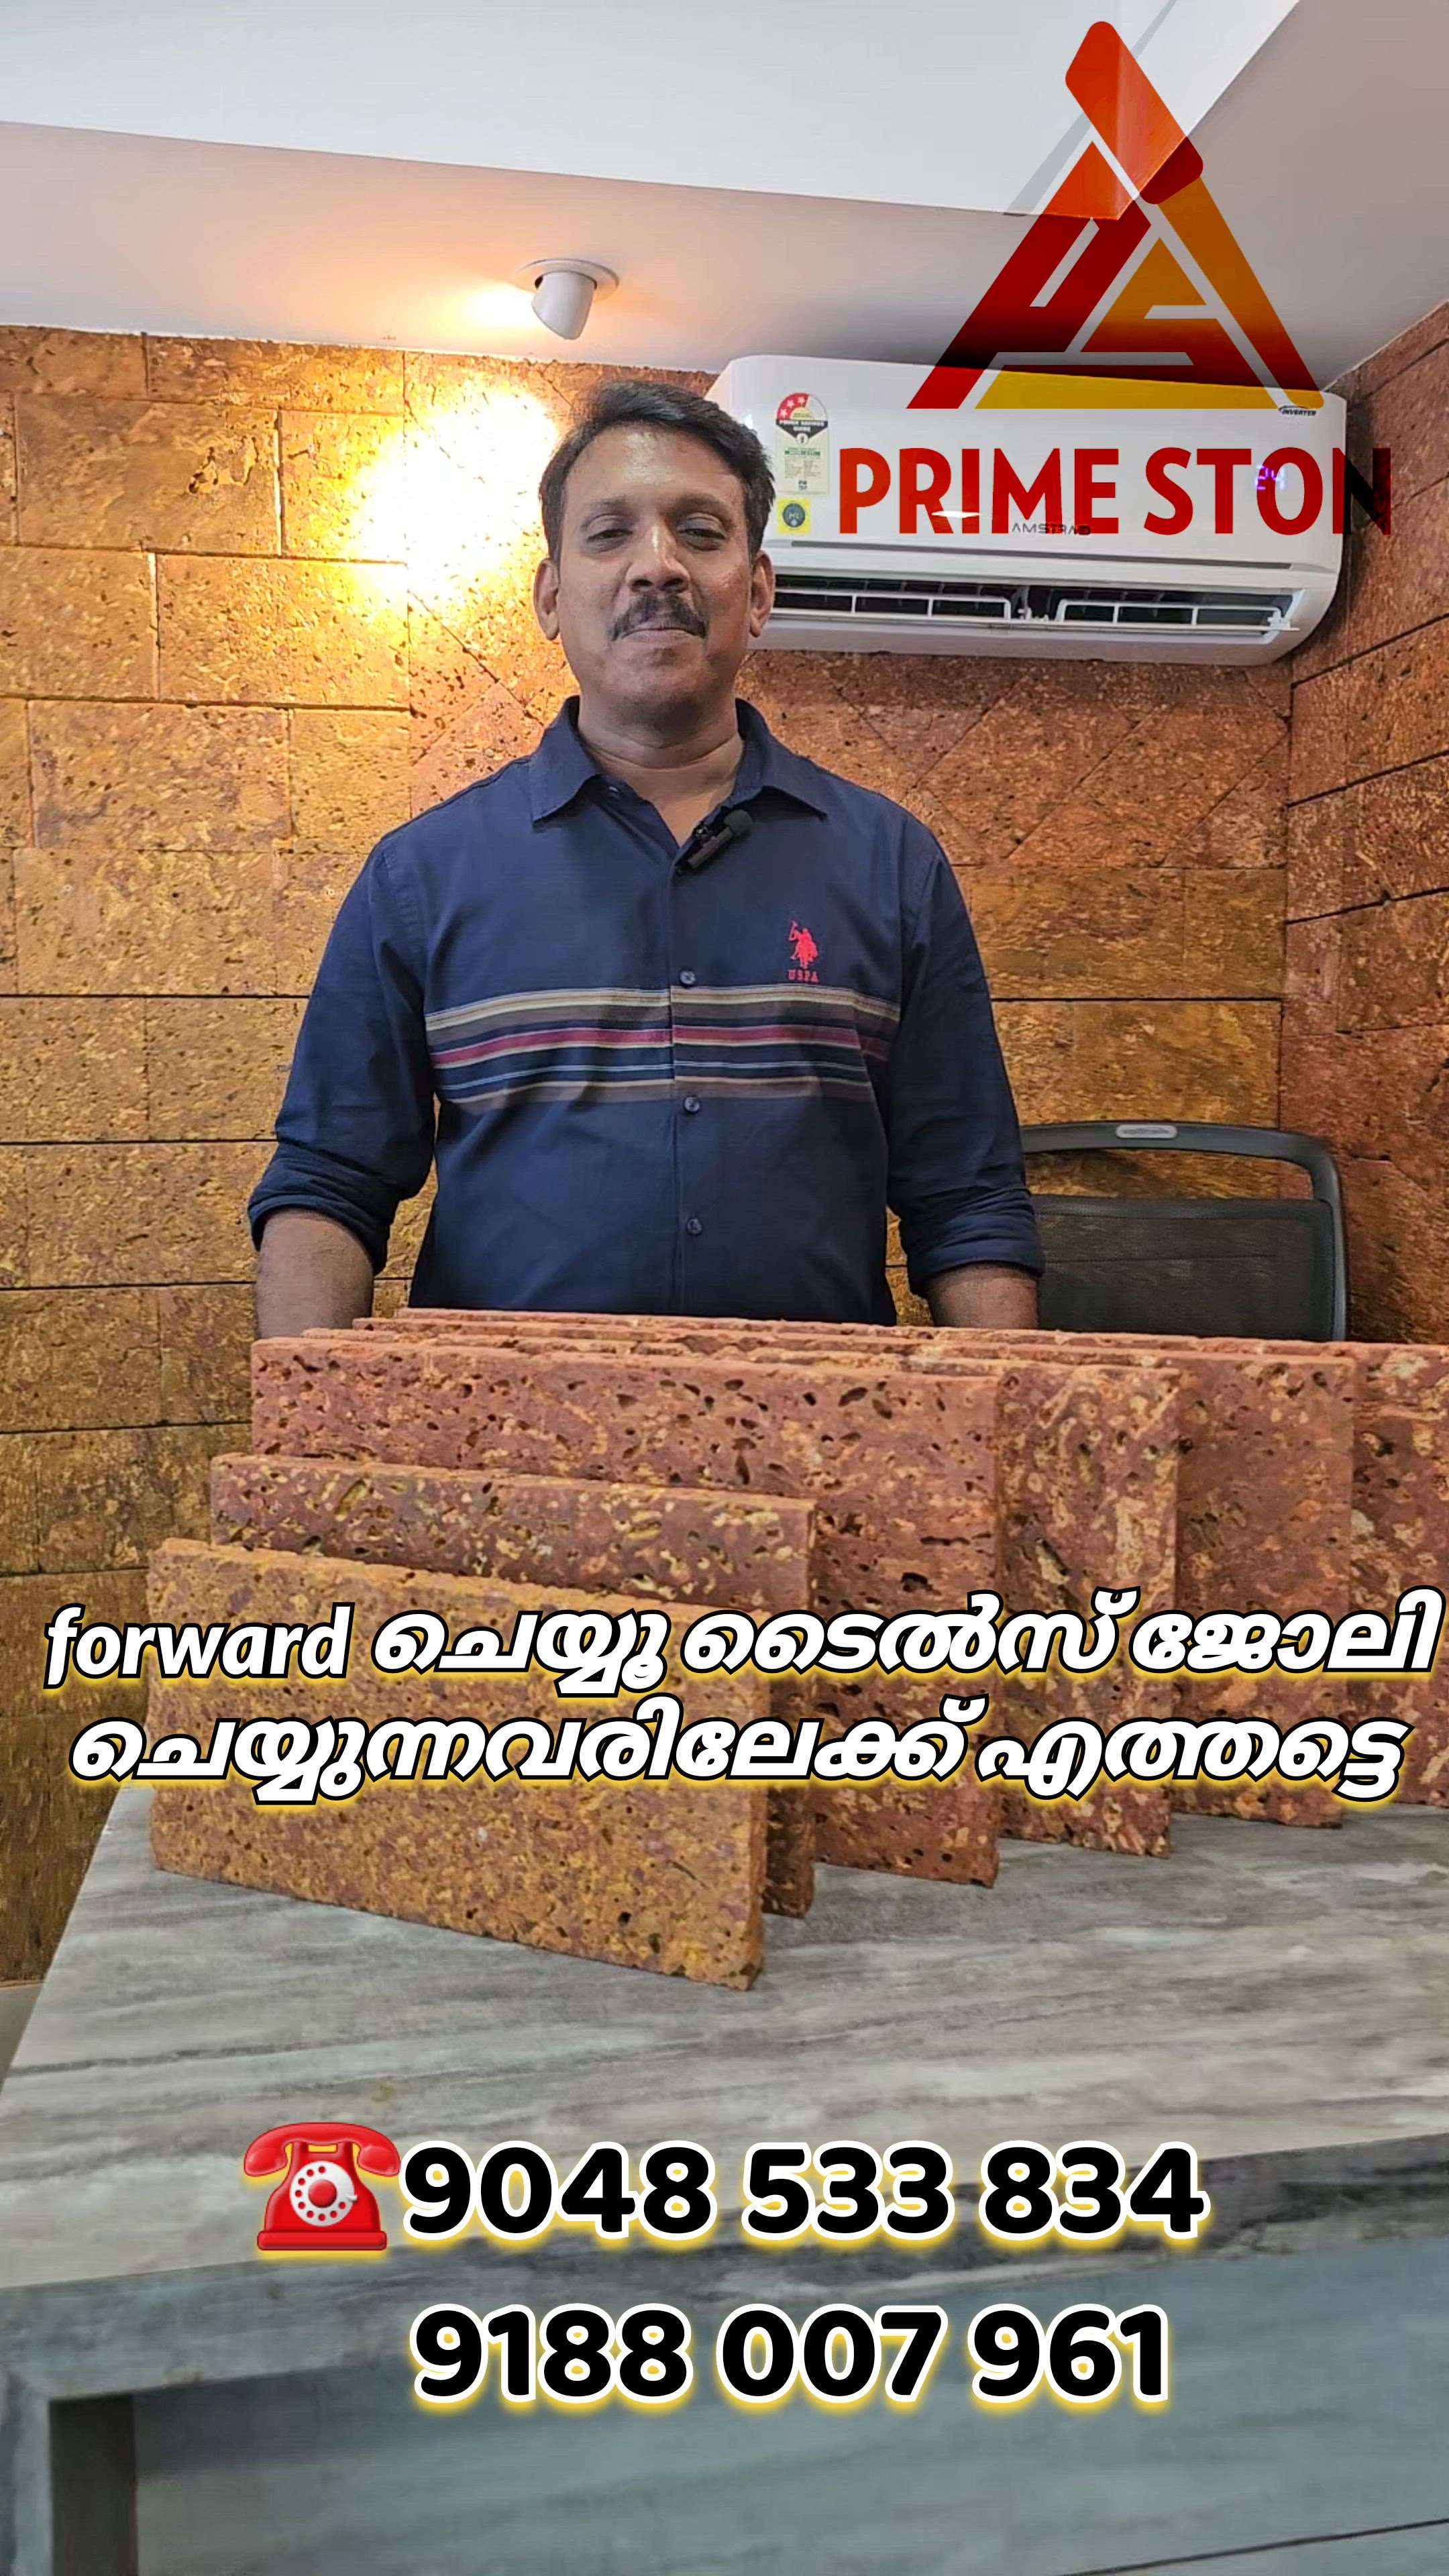 Forward ചെയ്യൂ ടൈൽസ് ജോലി ചെയ്യുന്നവരിലേക്ക് എത്തട്ടെ ഈ വിവരം 🙏
PRIME STON❤️ Laterite Cladding Tiles# Laterite Flooring Slabs# Laterite Paving Stones, Laterite Furniture's, Laterite Monuments, Laterite Single Pillars ...
💚100% Natural Laterite Stone Products Manufacturer and laying contractor 💚
Our Service Available Allover India

Available Sizes....
12/6,12/7,15/9,18/9,21/9,24/9 inches 20 mm thickness...
Customized sizes also available...

Contact - 7306 706 542, 9188 007 961
 

primelaterite@gmail.com 
www.primestone.co. in
https://youtu.be/CtoUAPbgX08 #FlooringTiles  #tiles  #tile_adhesive  #BuildingSupplies  #BestBuildersInKerala  #Architect  #kerala_architecture  #new_home  #newmodal  #traditionalmuralpaintings  #traditiinal